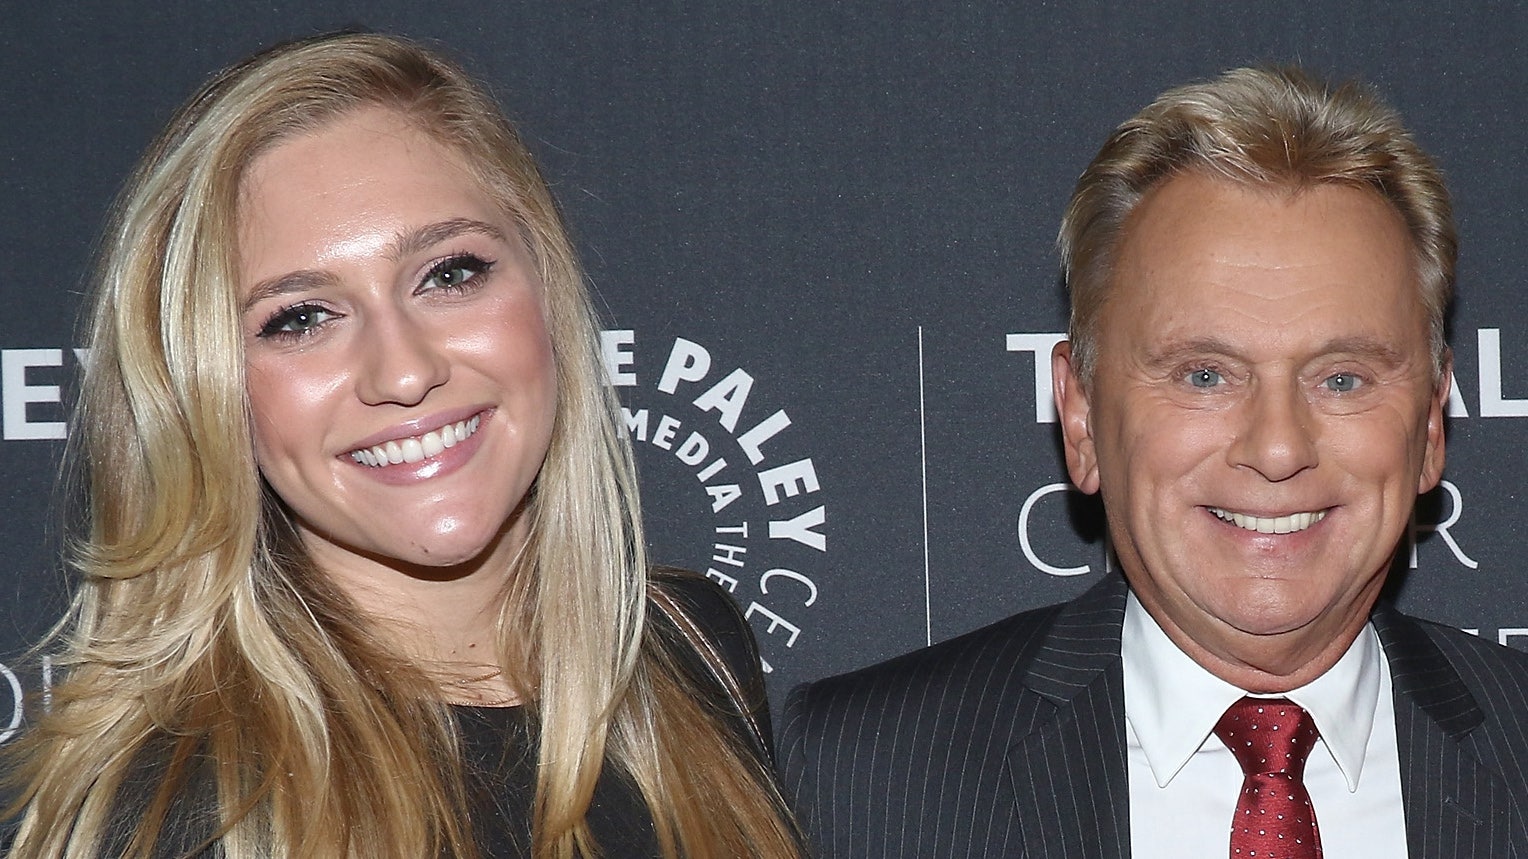 ‘Wheel of Fortune’ fans outraged over Pat Sajak’s comment about daughter Maggie: 'Nepotism at its best'